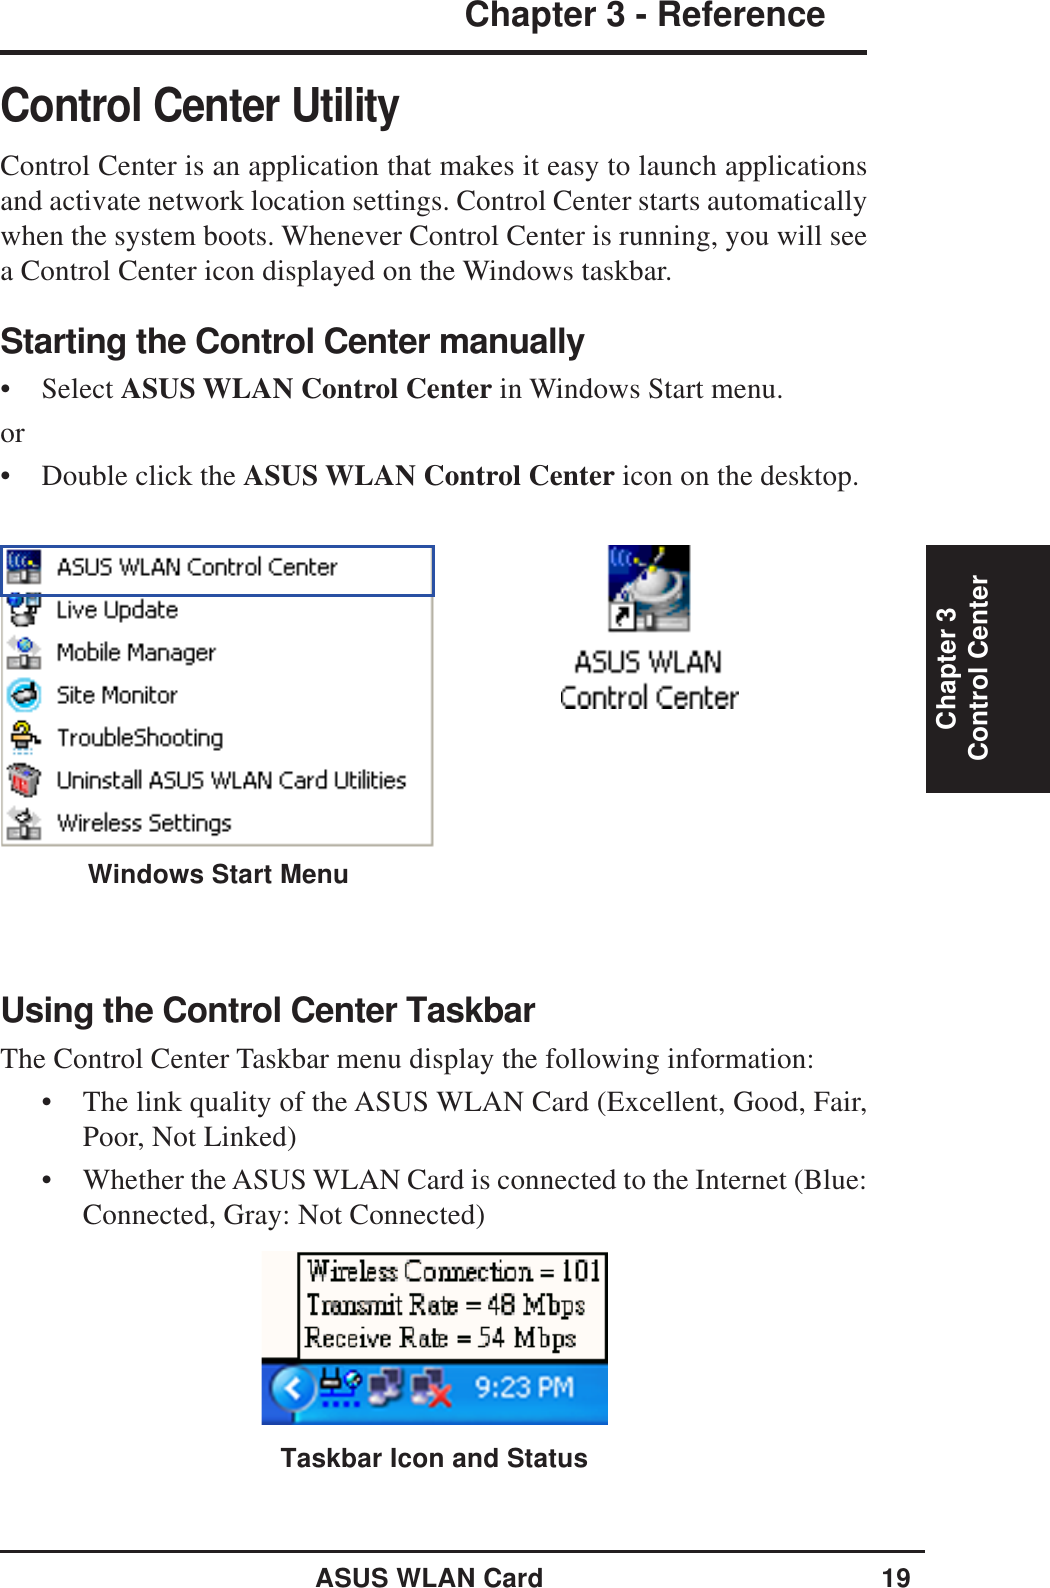 ASUS WLAN Card 19Chapter 3 - ReferenceChapter 3Control CenterControl Center UtilityControl Center is an application that makes it easy to launch applicationsand activate network location settings. Control Center starts automaticallywhen the system boots. Whenever Control Center is running, you will seea Control Center icon displayed on the Windows taskbar.Starting the Control Center manually• Select ASUS WLAN Control Center in Windows Start menu.or• Double click the ASUS WLAN Control Center icon on the desktop.Using the Control Center TaskbarThe Control Center Taskbar menu display the following information:• The link quality of the ASUS WLAN Card (Excellent, Good, Fair,Poor, Not Linked)• Whether the ASUS WLAN Card is connected to the Internet (Blue:Connected, Gray: Not Connected)Taskbar Icon and StatusWindows Start Menu